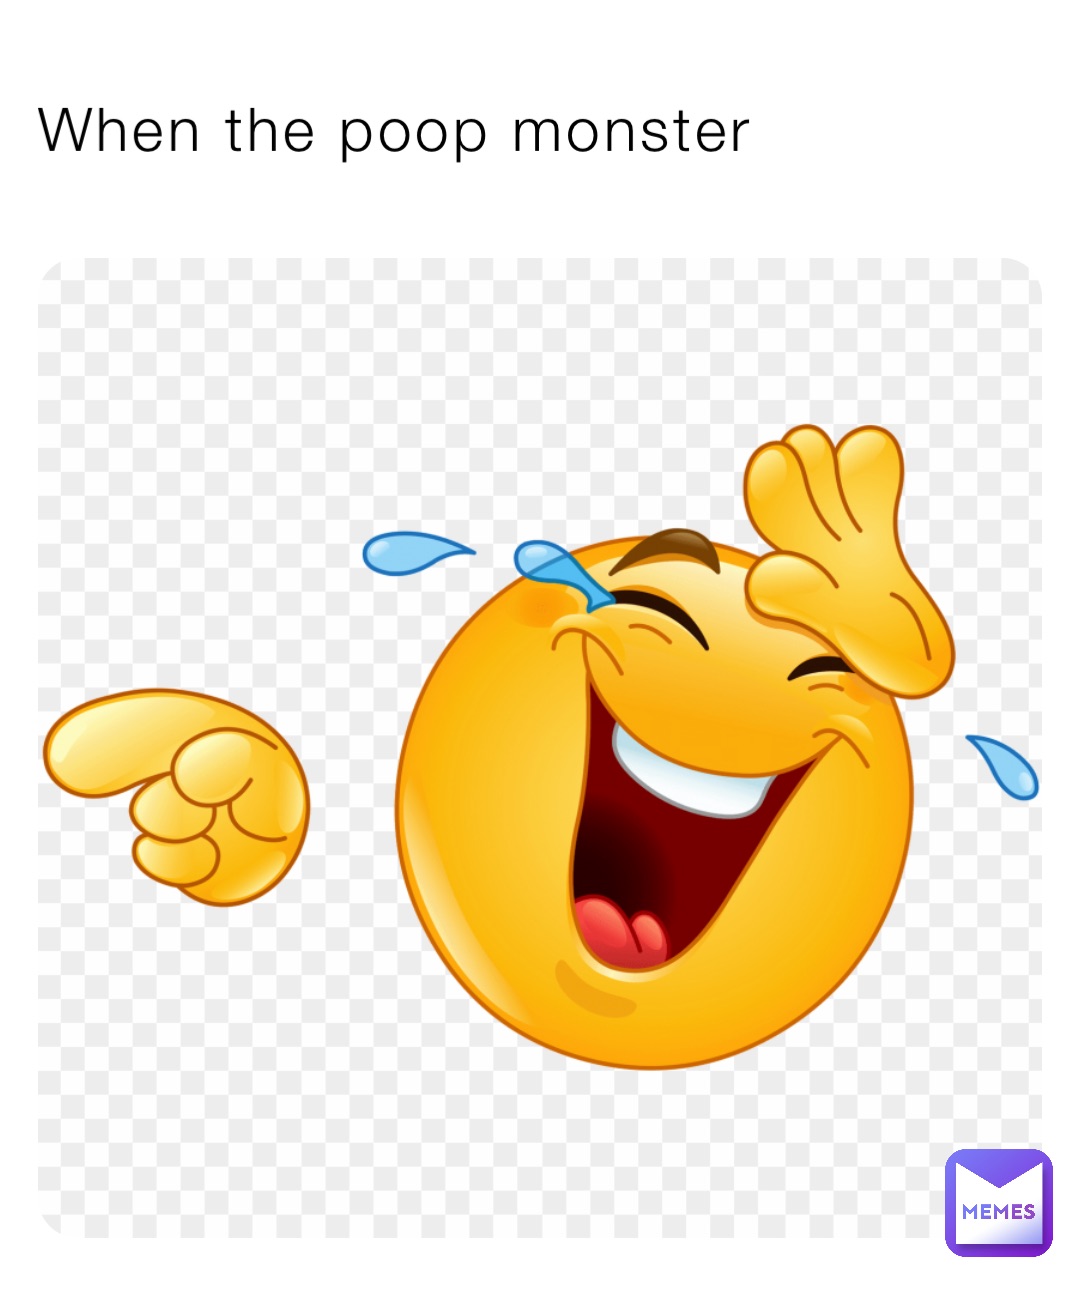 When the poop monster